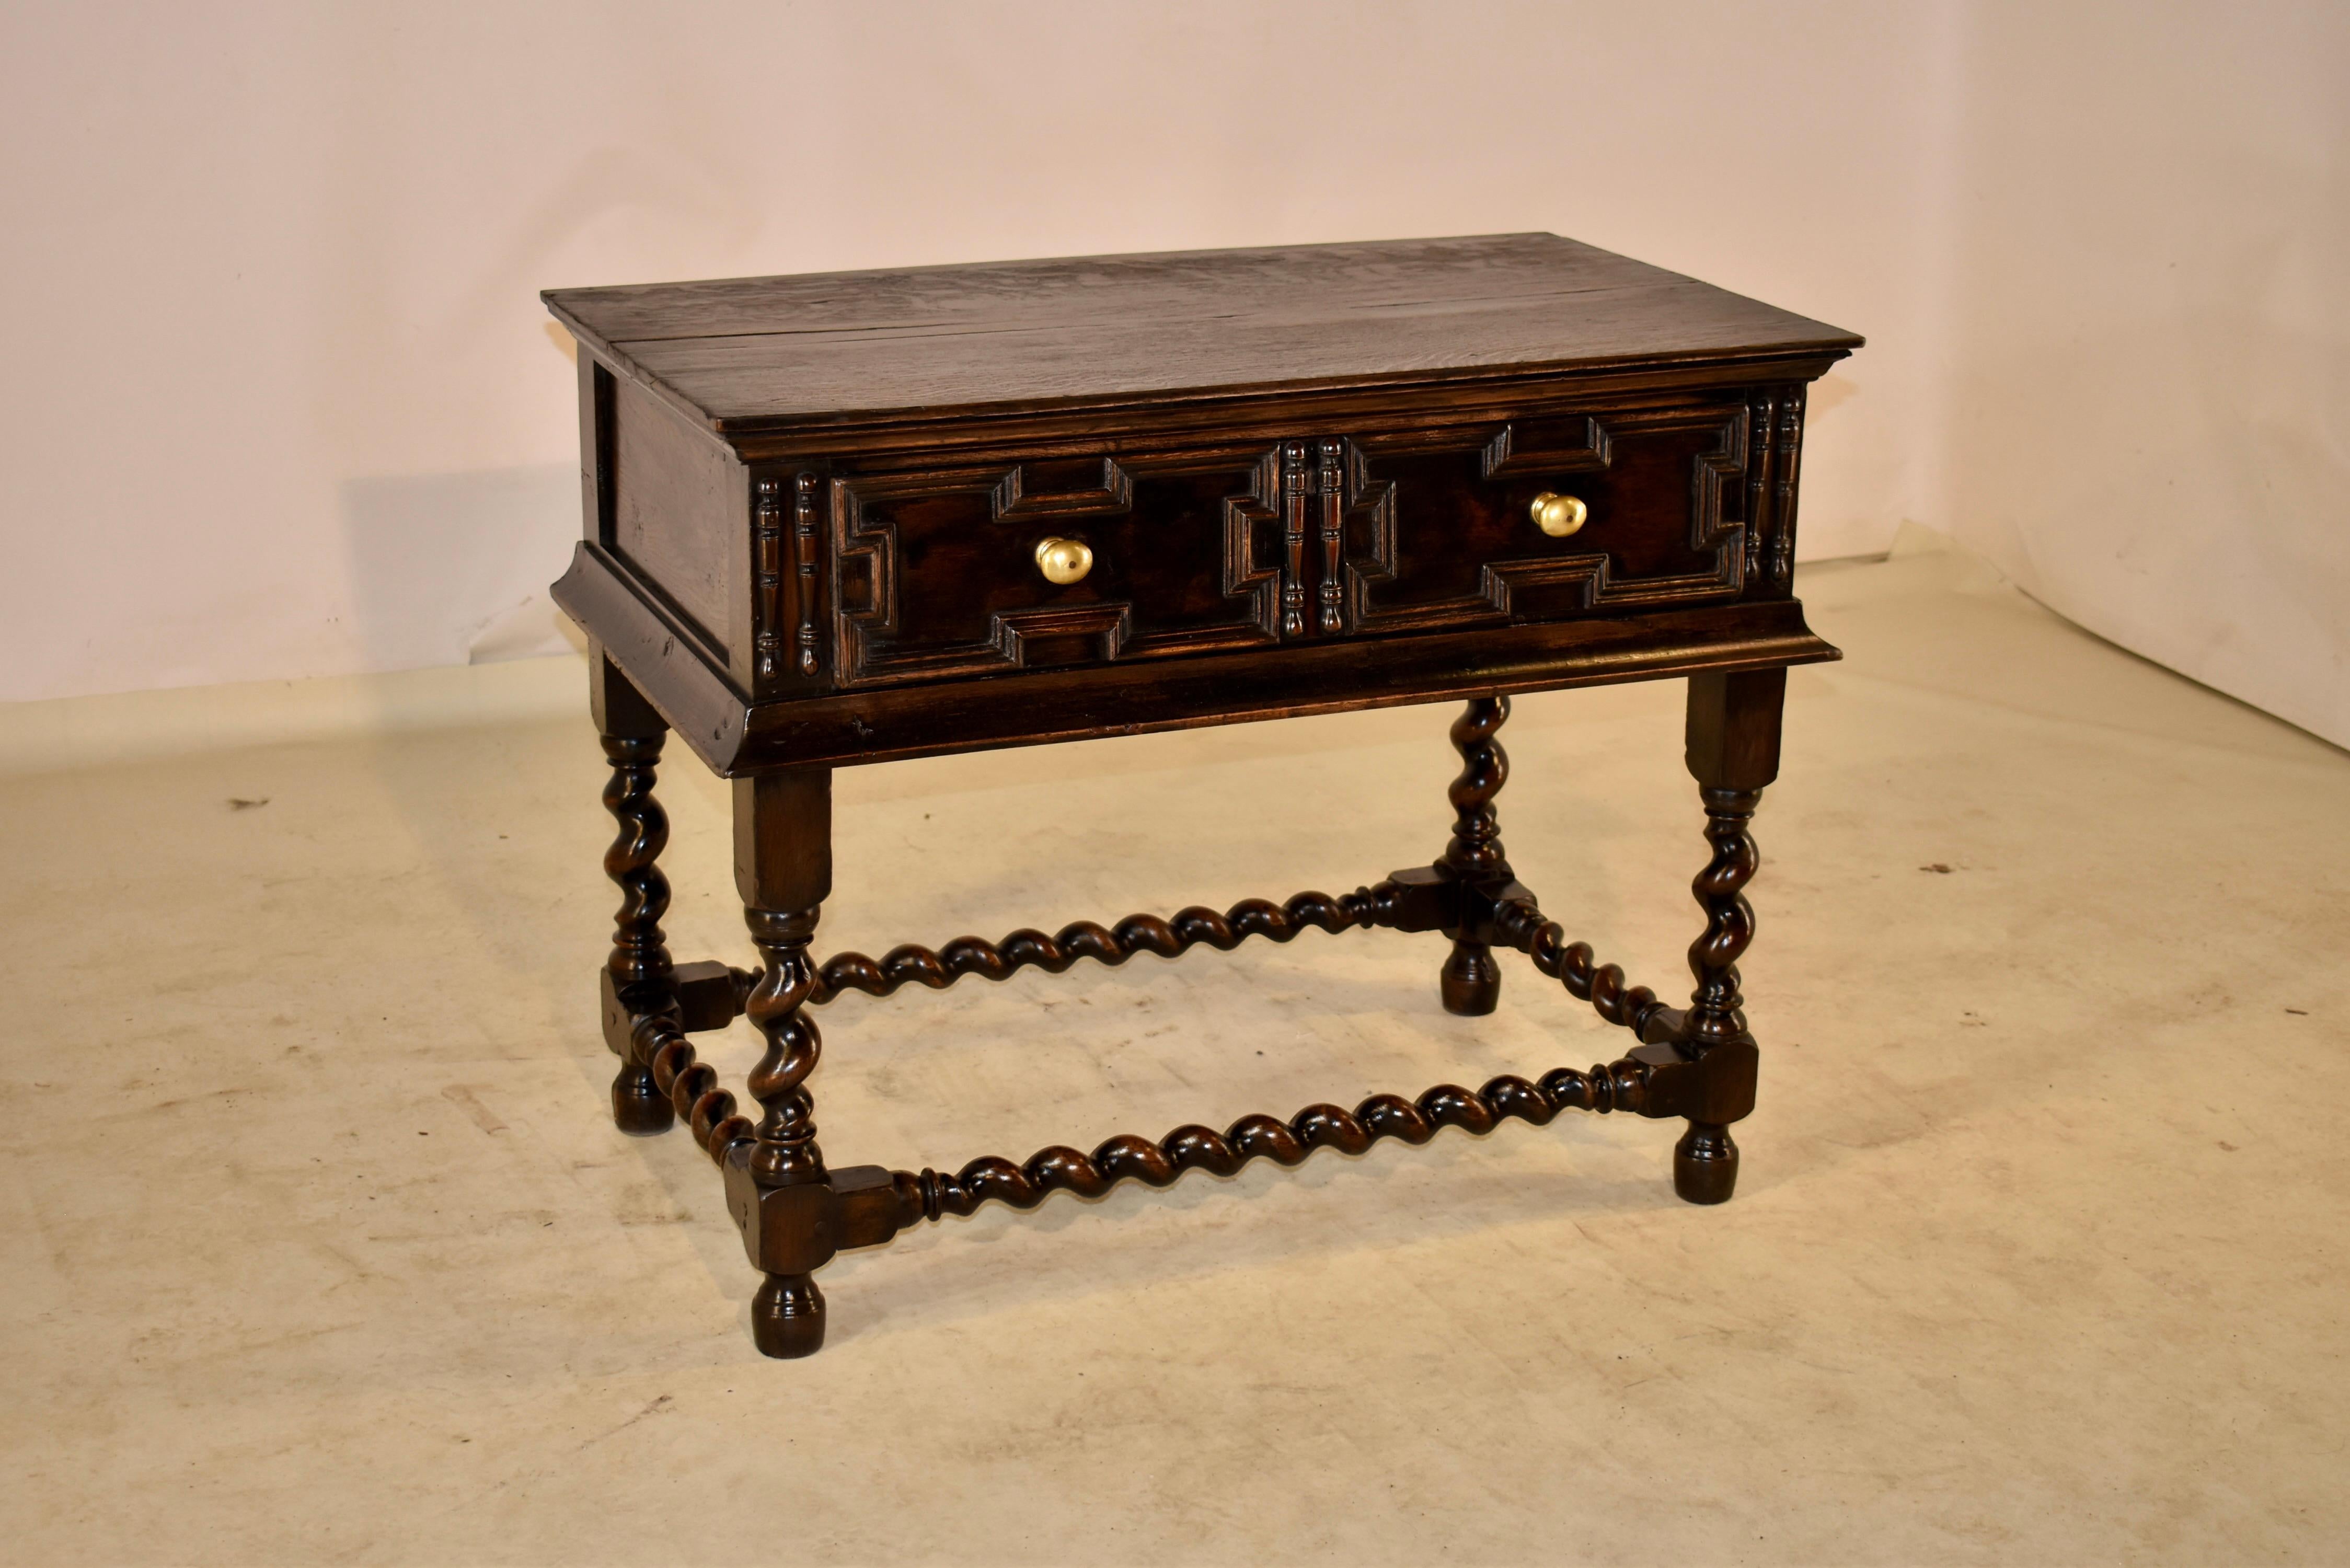 Early 18th century oak table from England with hand paneled sides and a single drawer in the front, which also has hand applied geometric molding. The drawer is flanked by applied turnings and has a molded apron below. The table is supported on hand